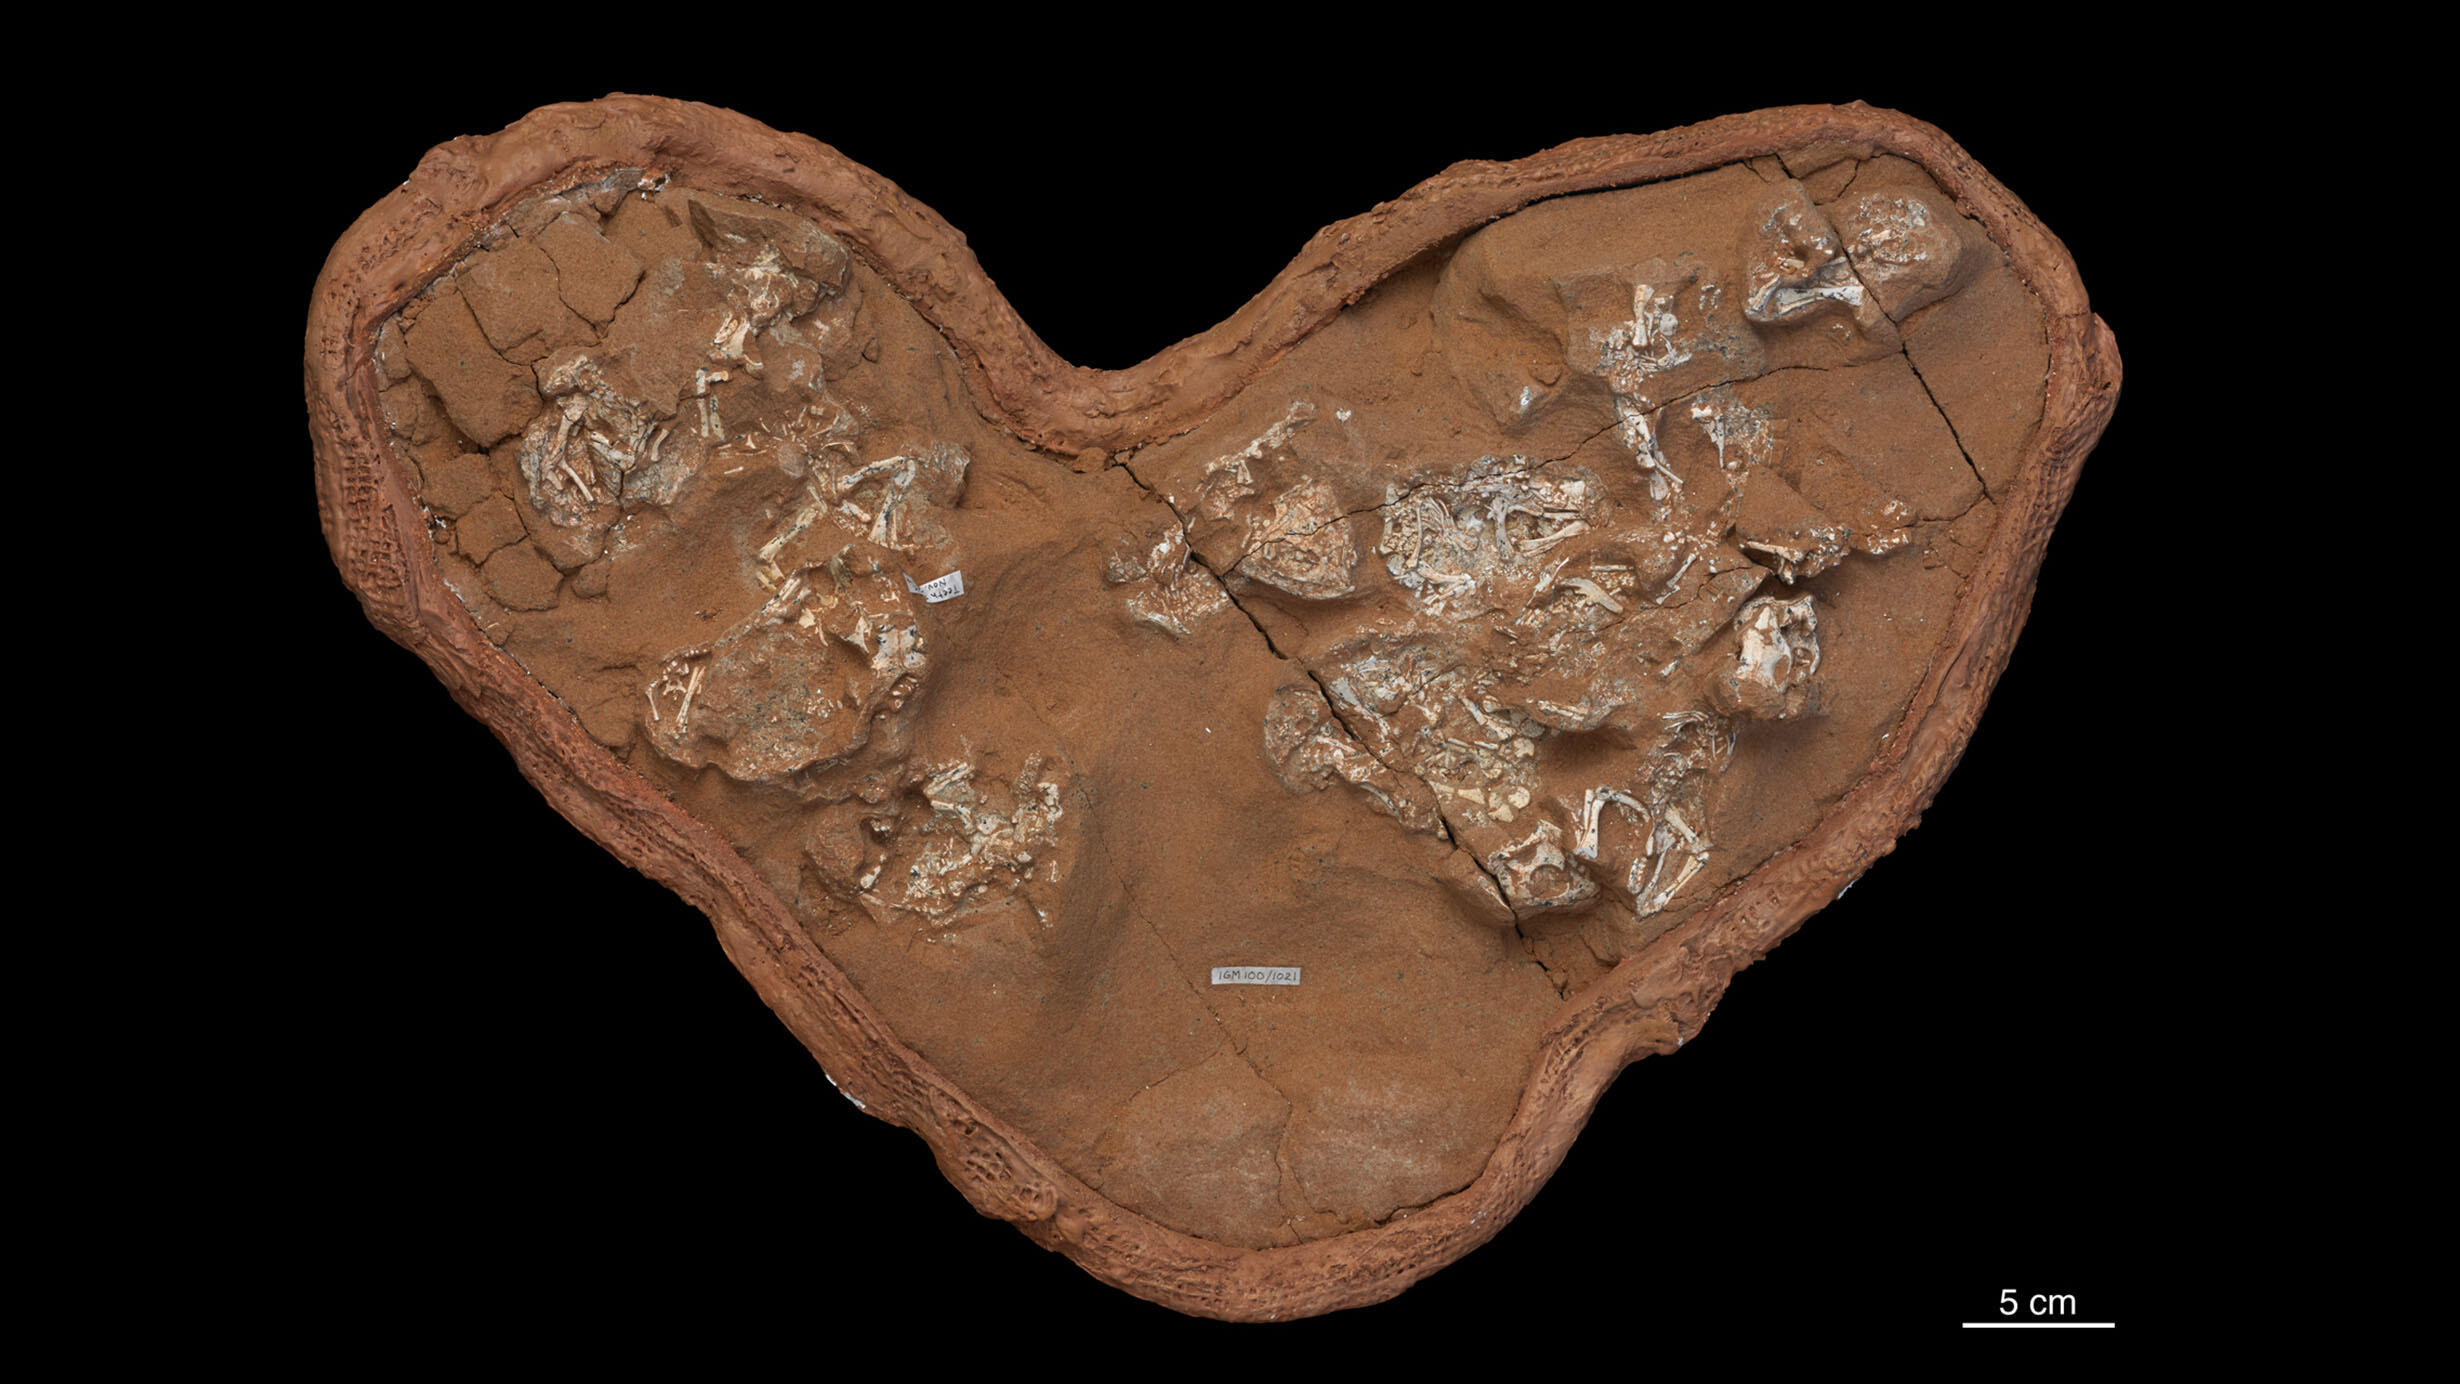 Complete fossilized nest contains dinosaur embryos with a surrounding shell shape.